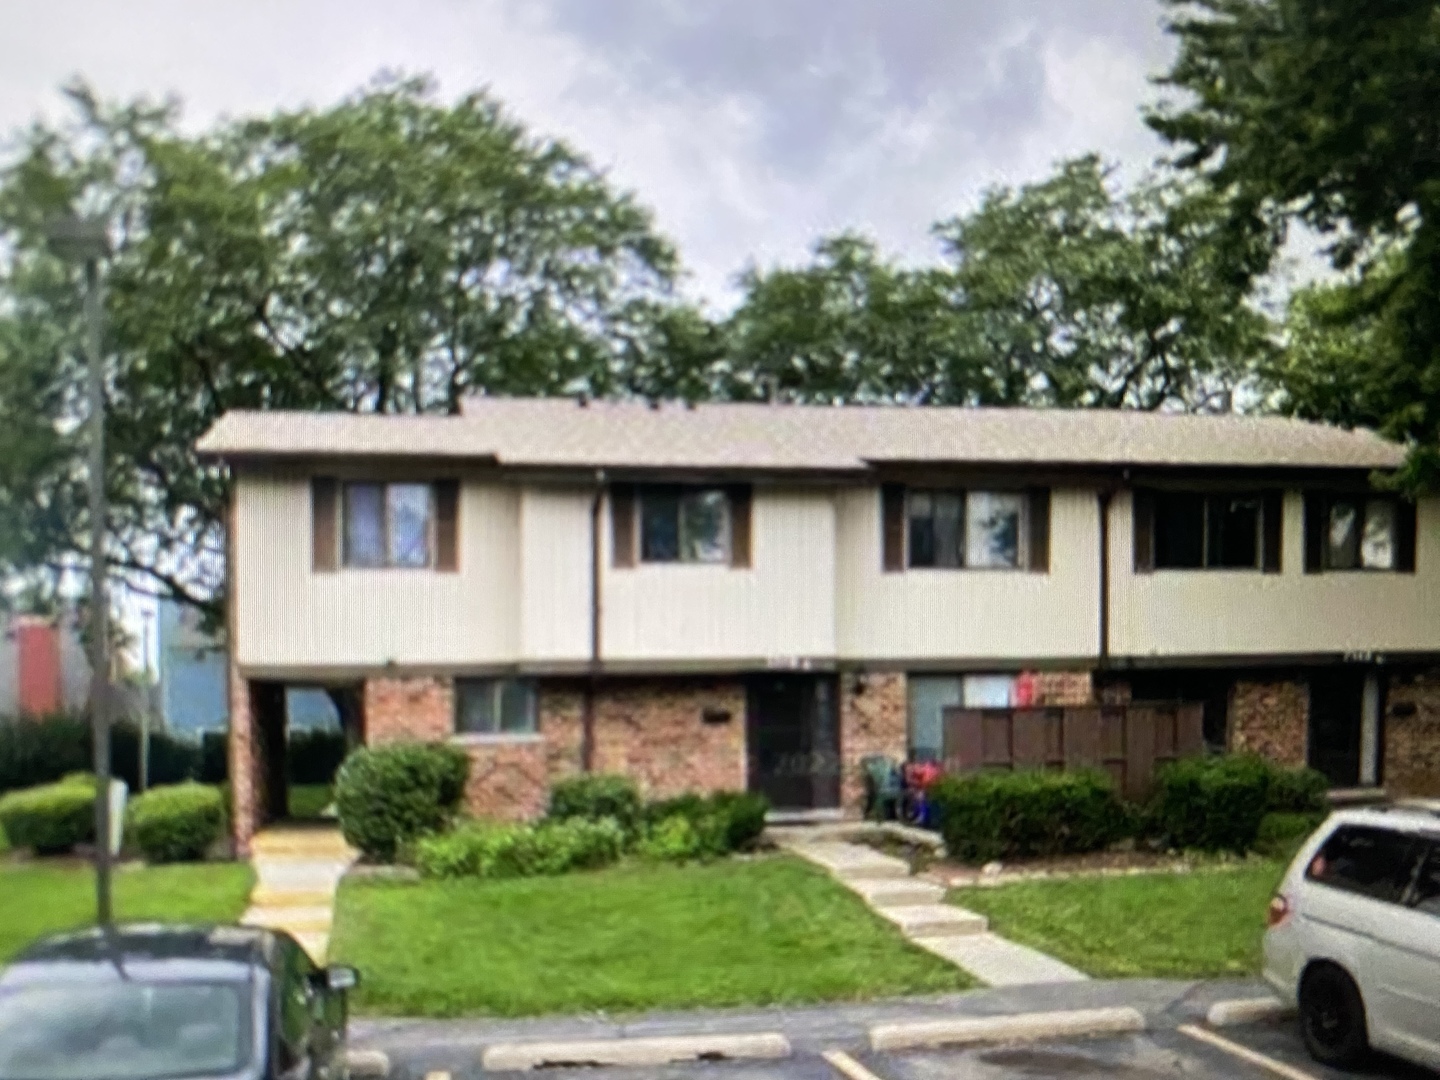 7343 Country Creek Way, Unit 5, Downers Grove, Il 60516